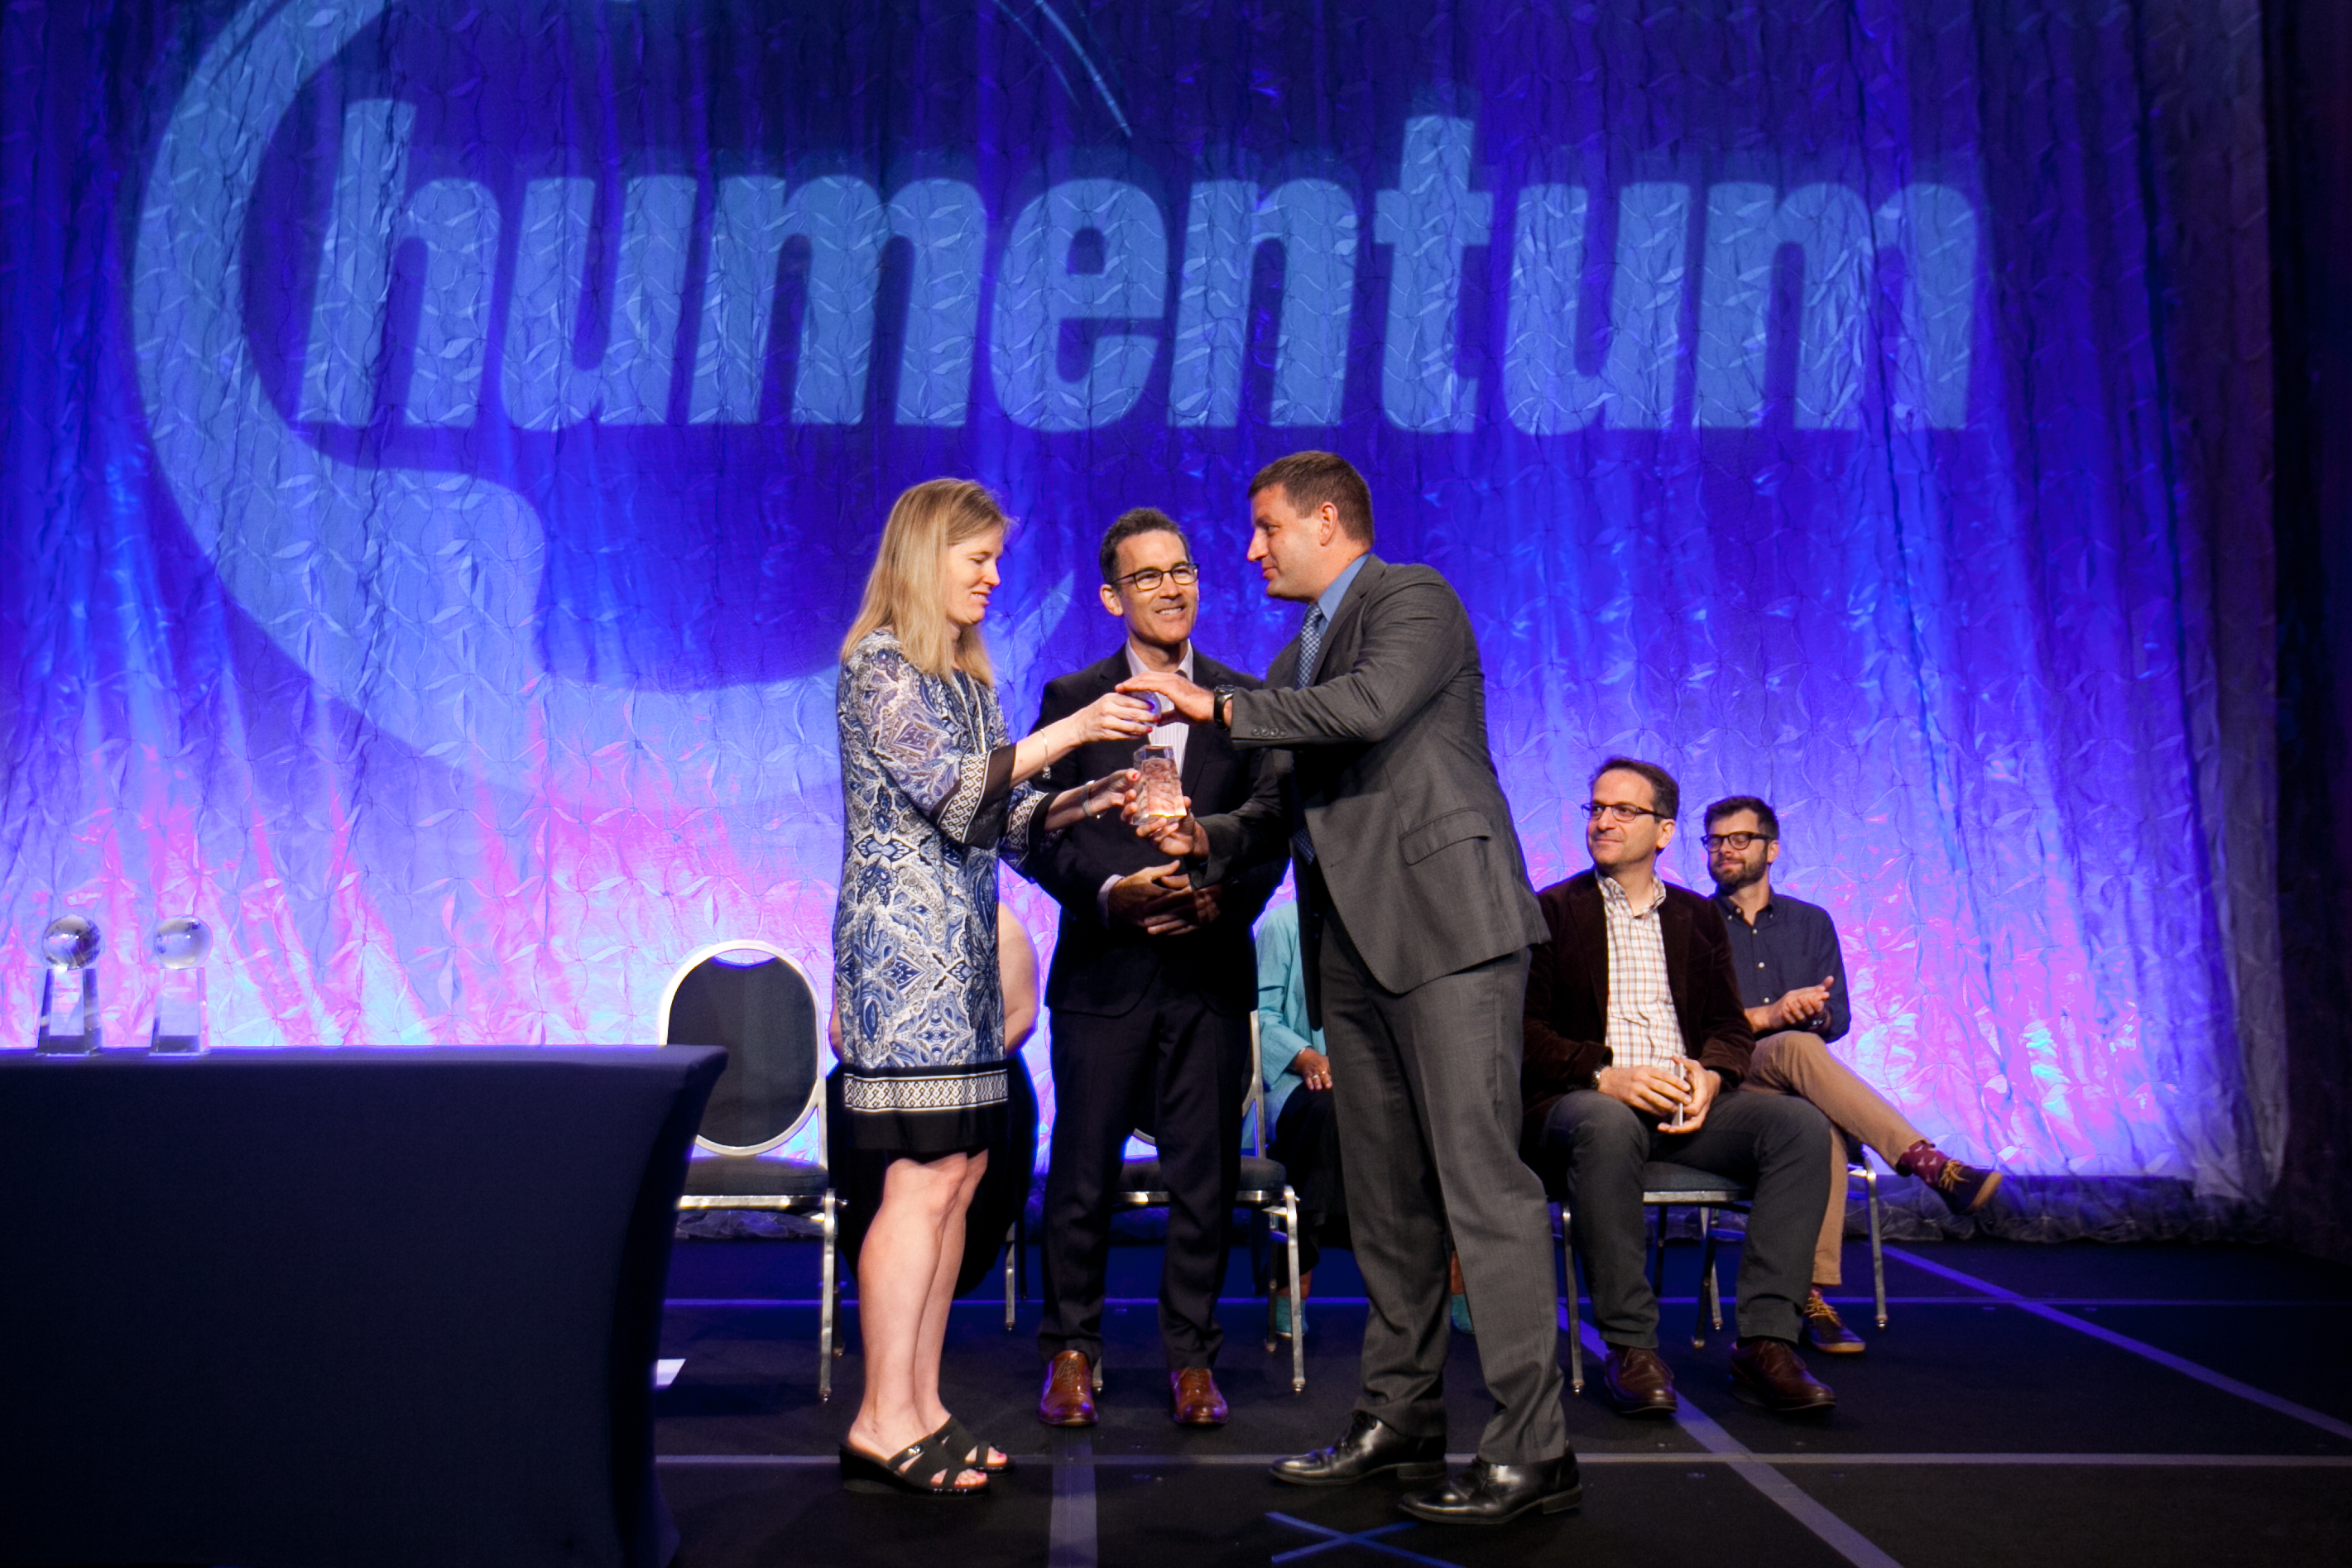 Brian von Kraus receives the Operational Excellence Award at the Humentum recognition breakfast in Washington, DC on July 27th.